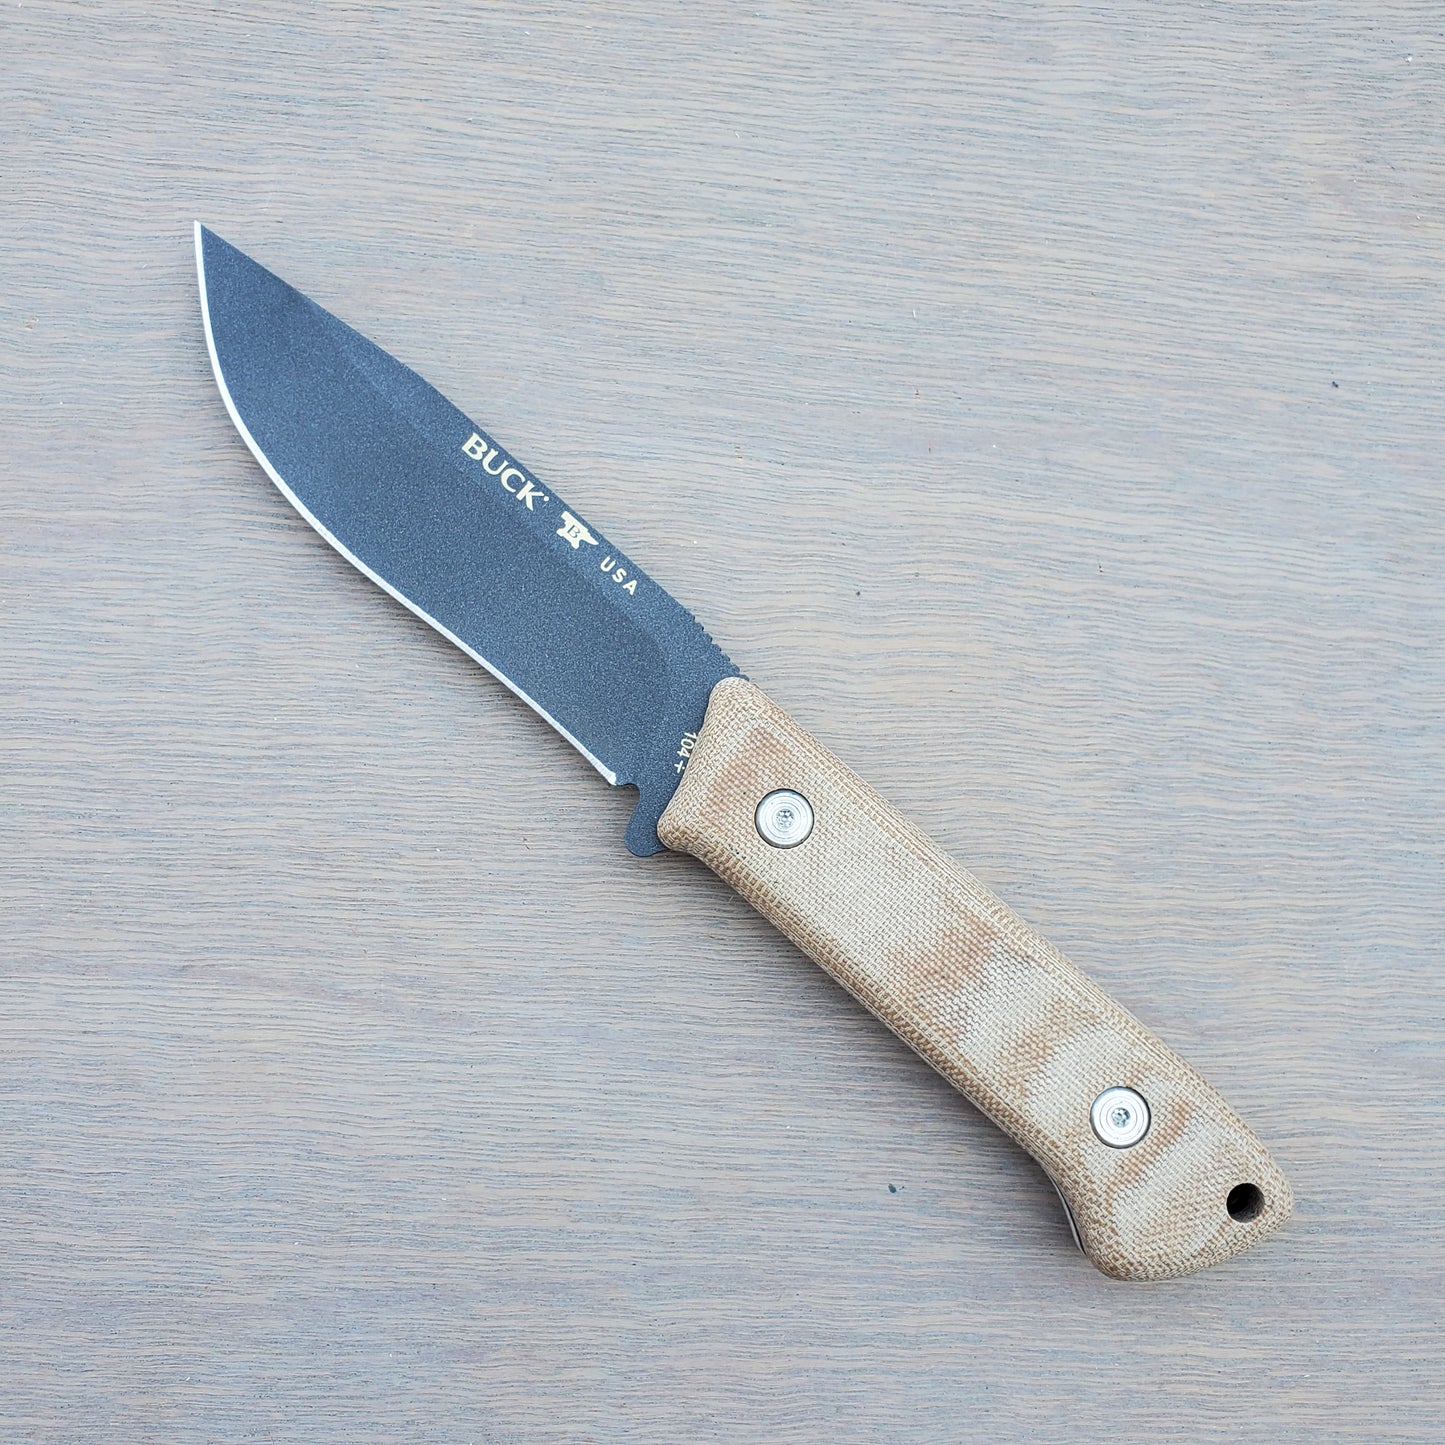 Buck 104 Compadre Camp Knife with Leather Sheath